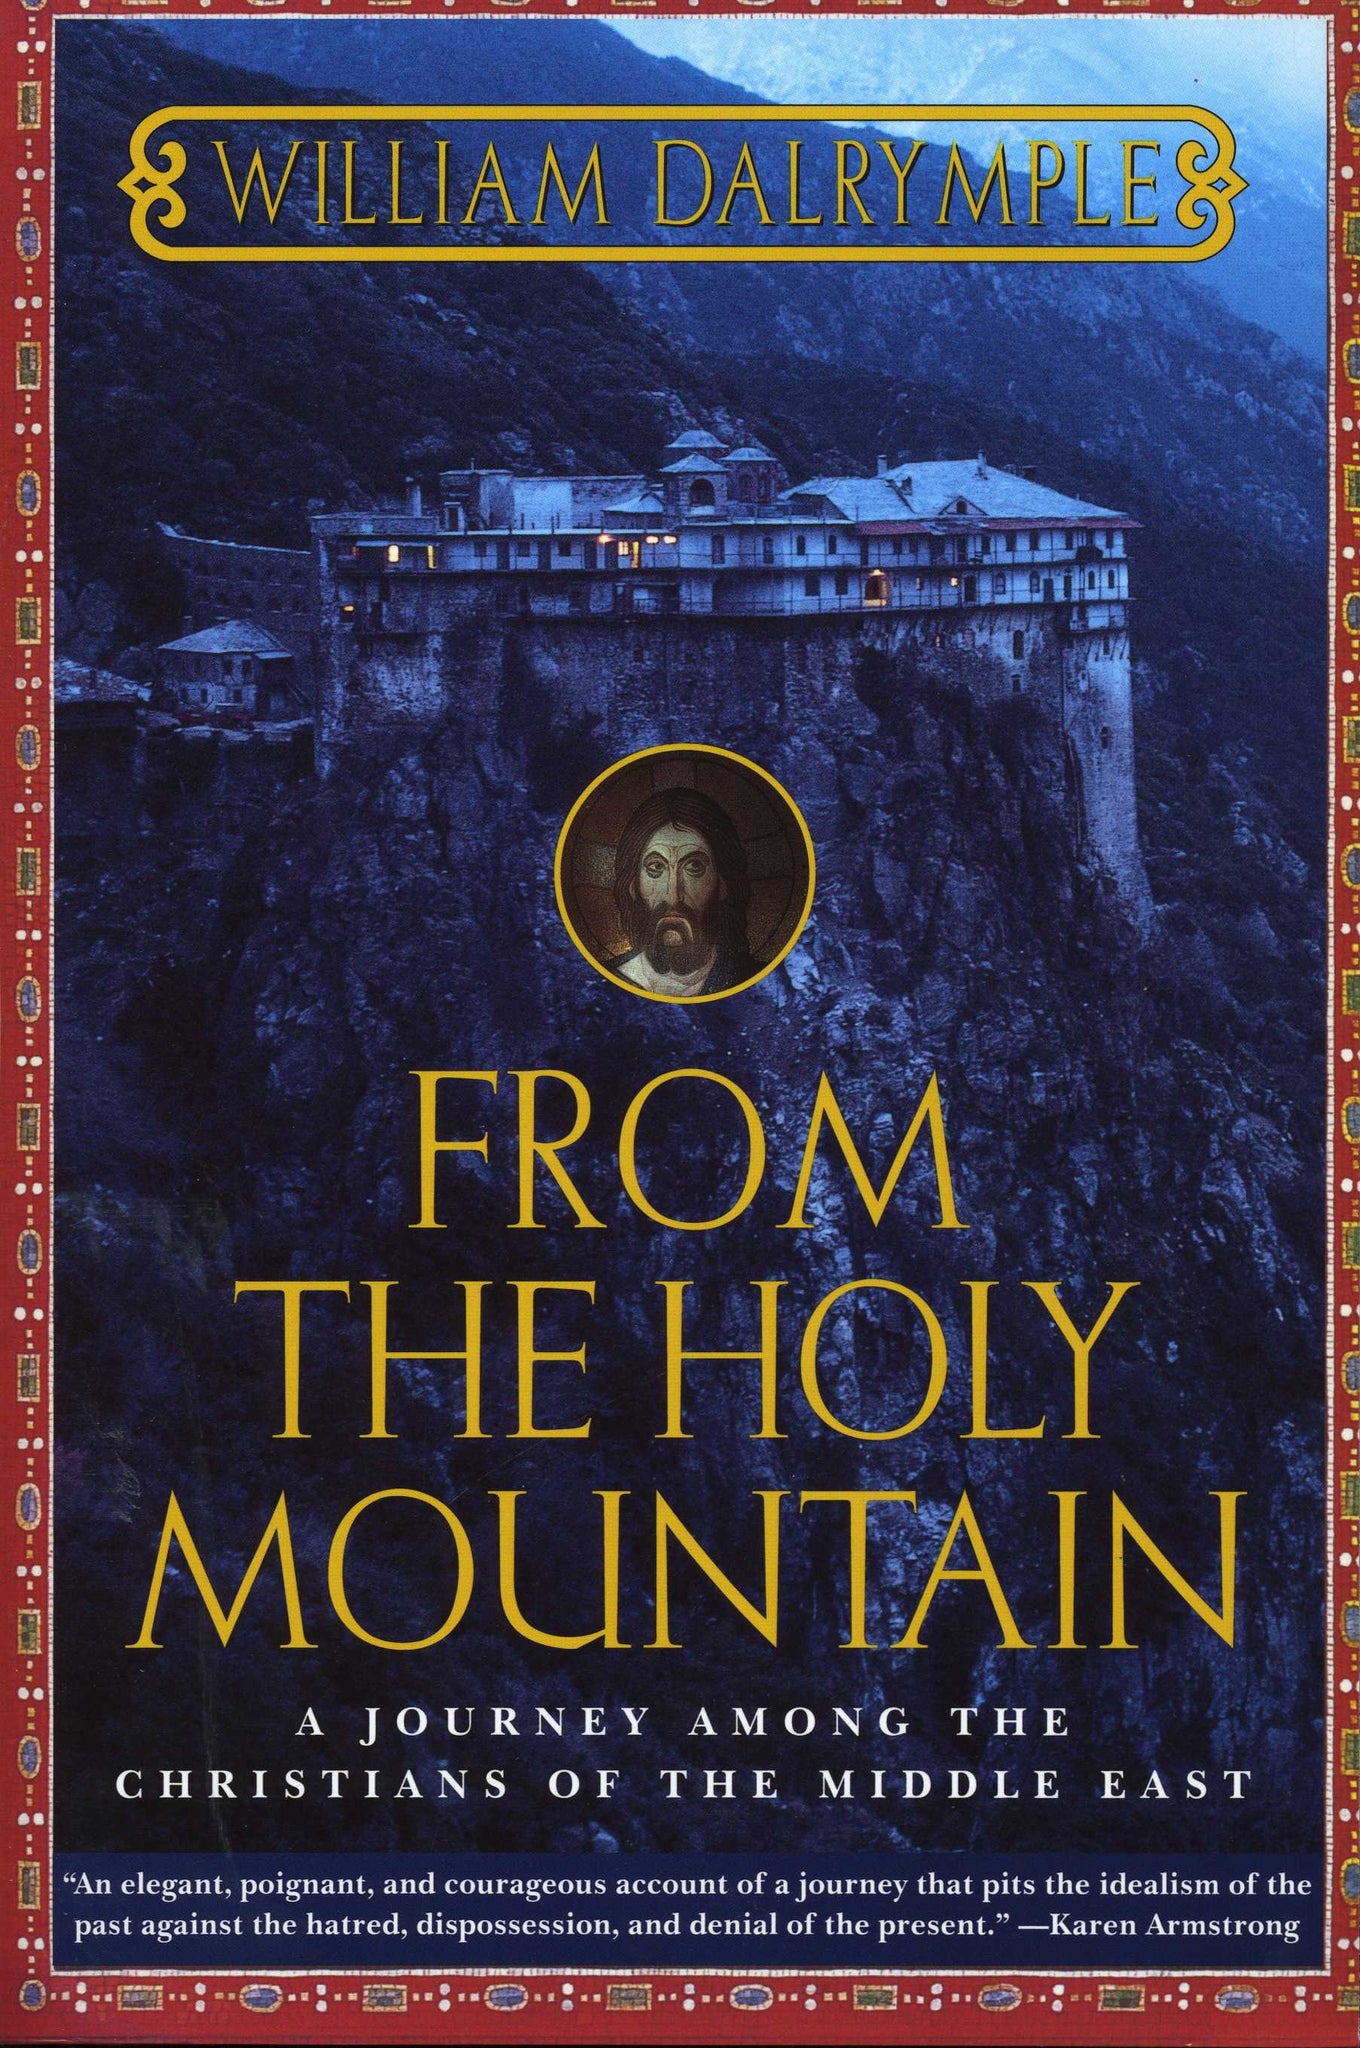 FROM THE HOLY MOUNTAIN: A Journey in the Shadow of Byzantium